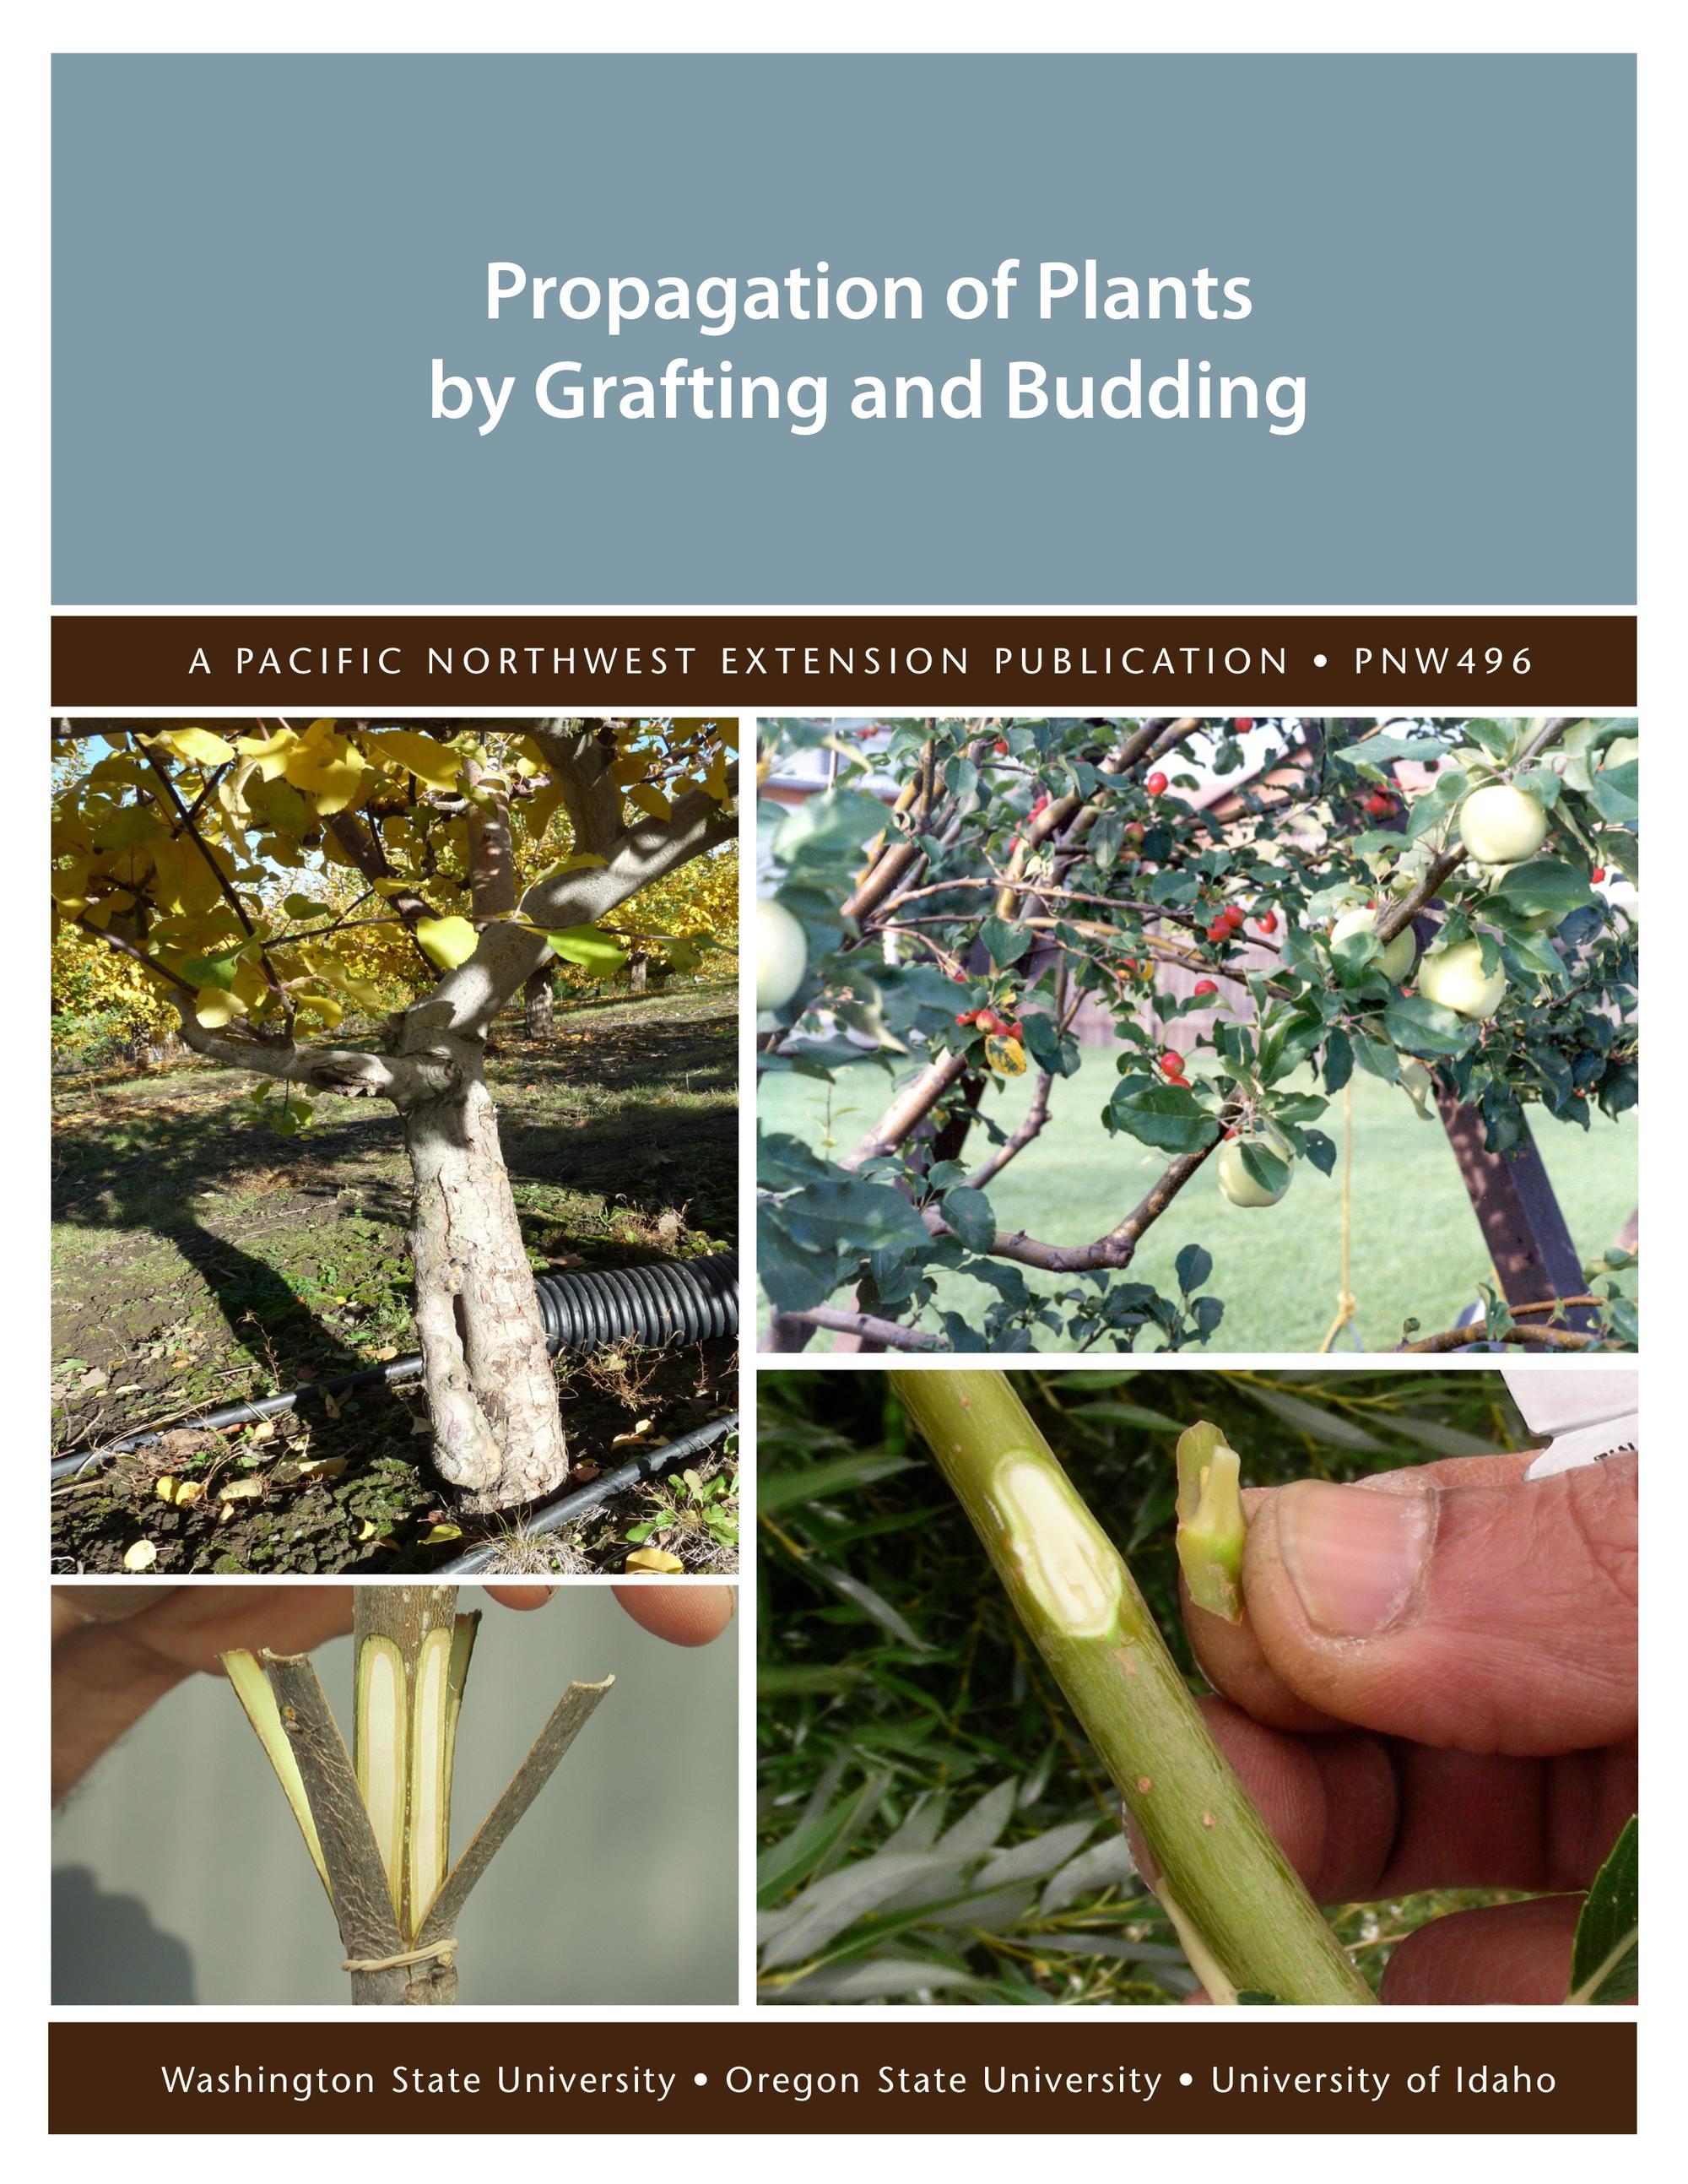 Image of Propagation of Plants by Grafting and Budding publication